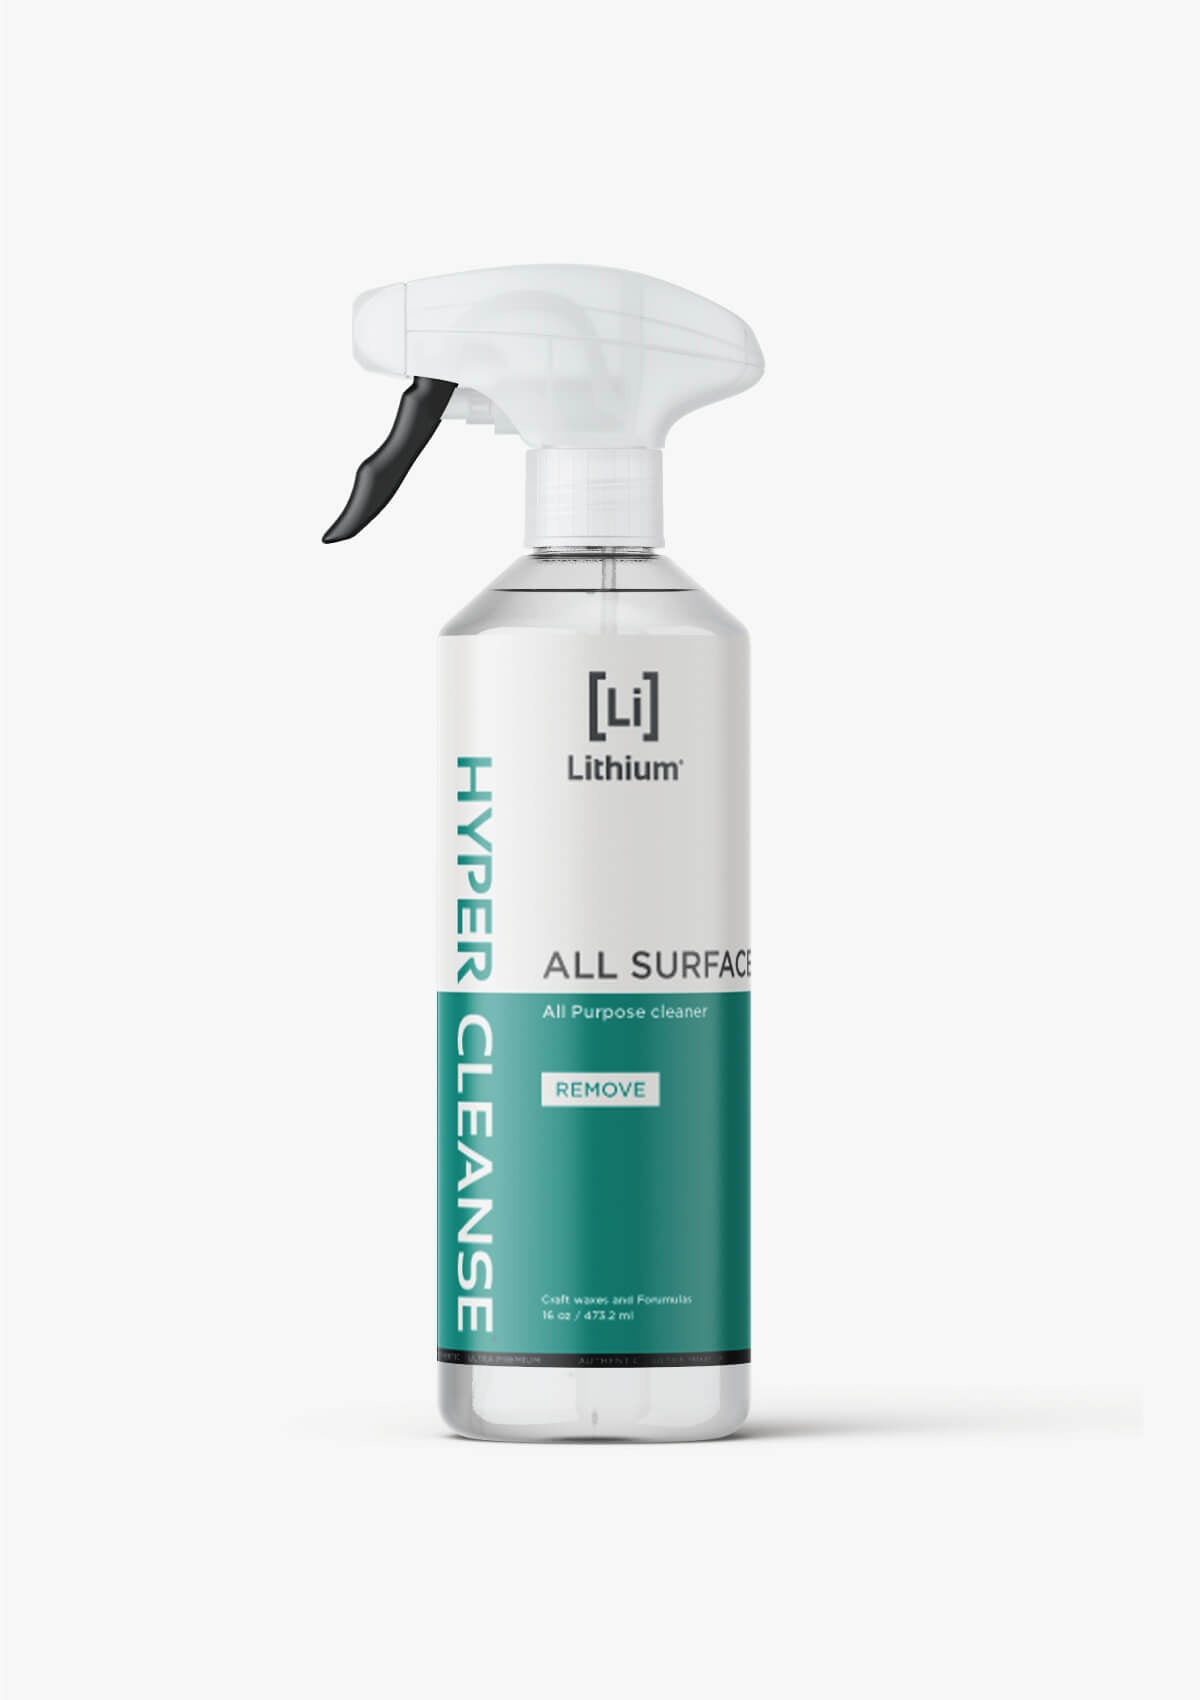 Hyper Cleanse - All Purpose Cleaner